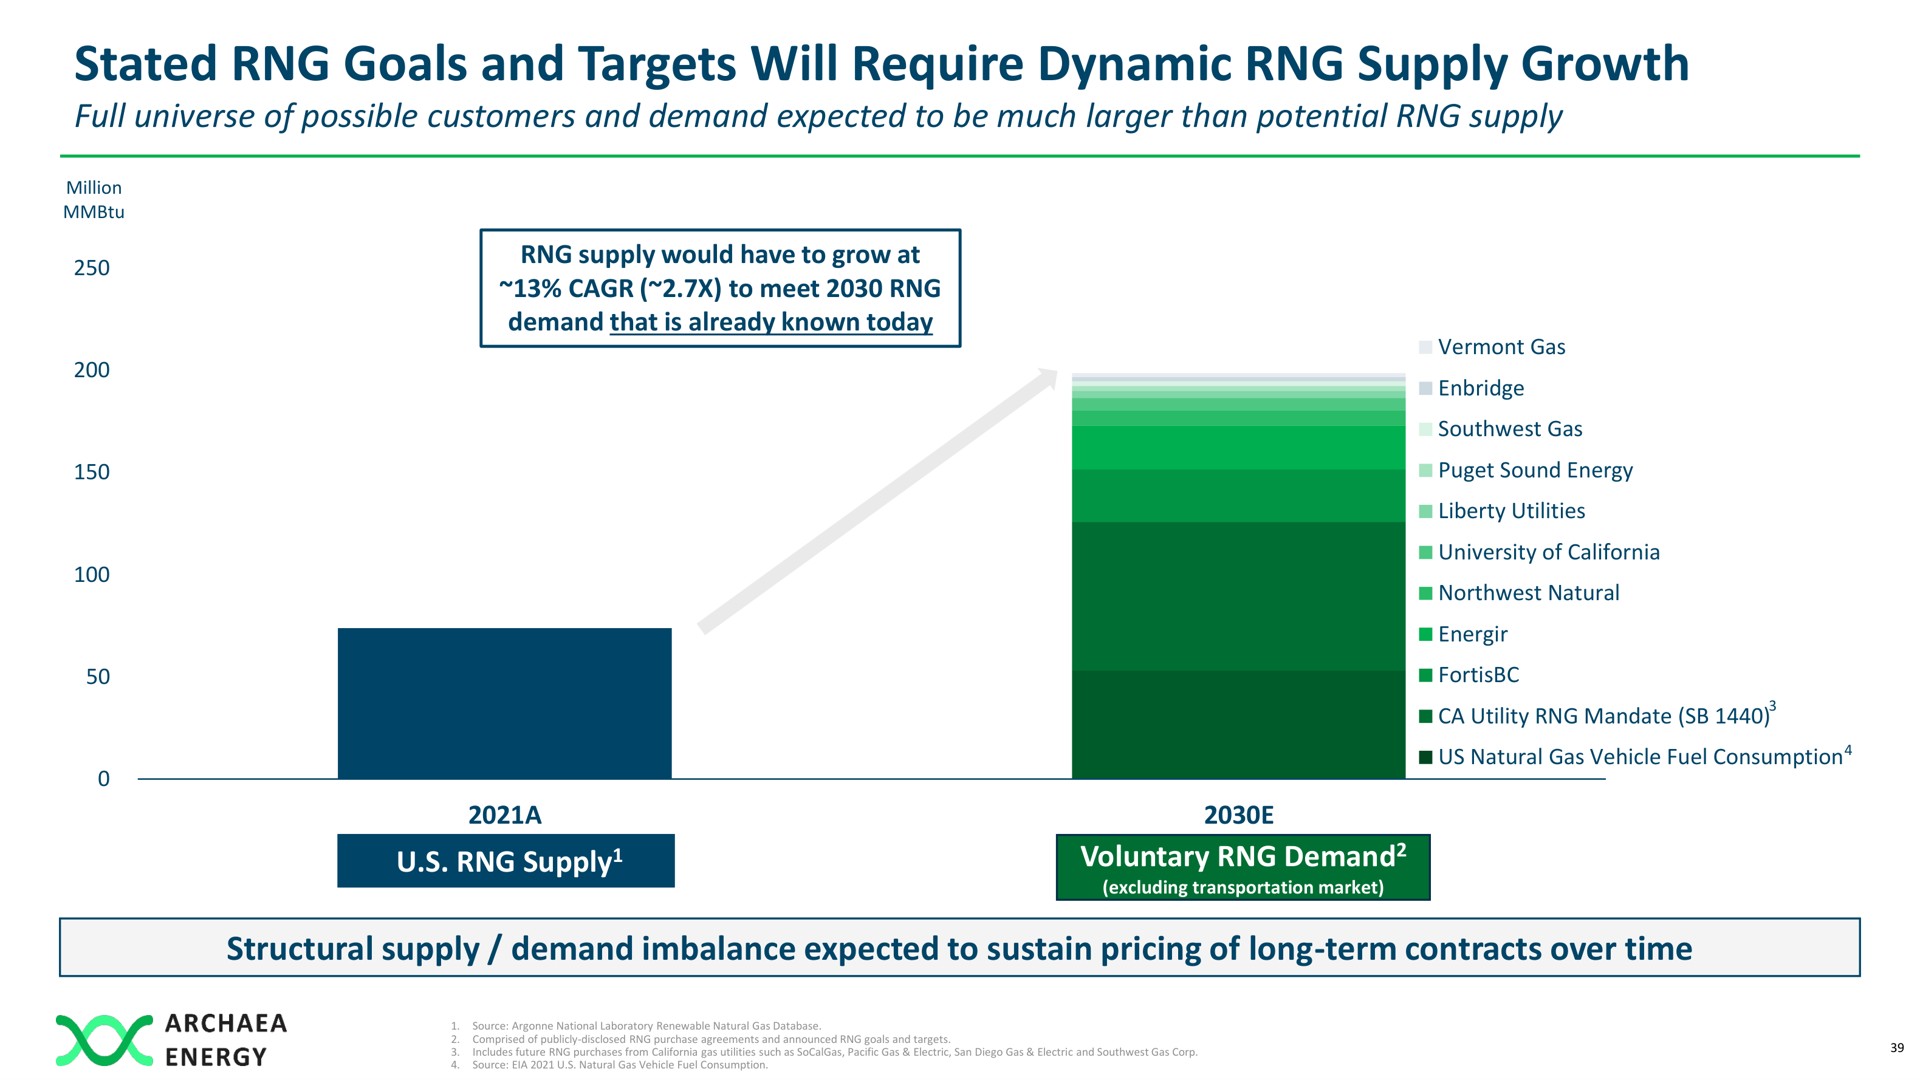 stated goals and targets will require dynamic supply growth | Archaea Energy